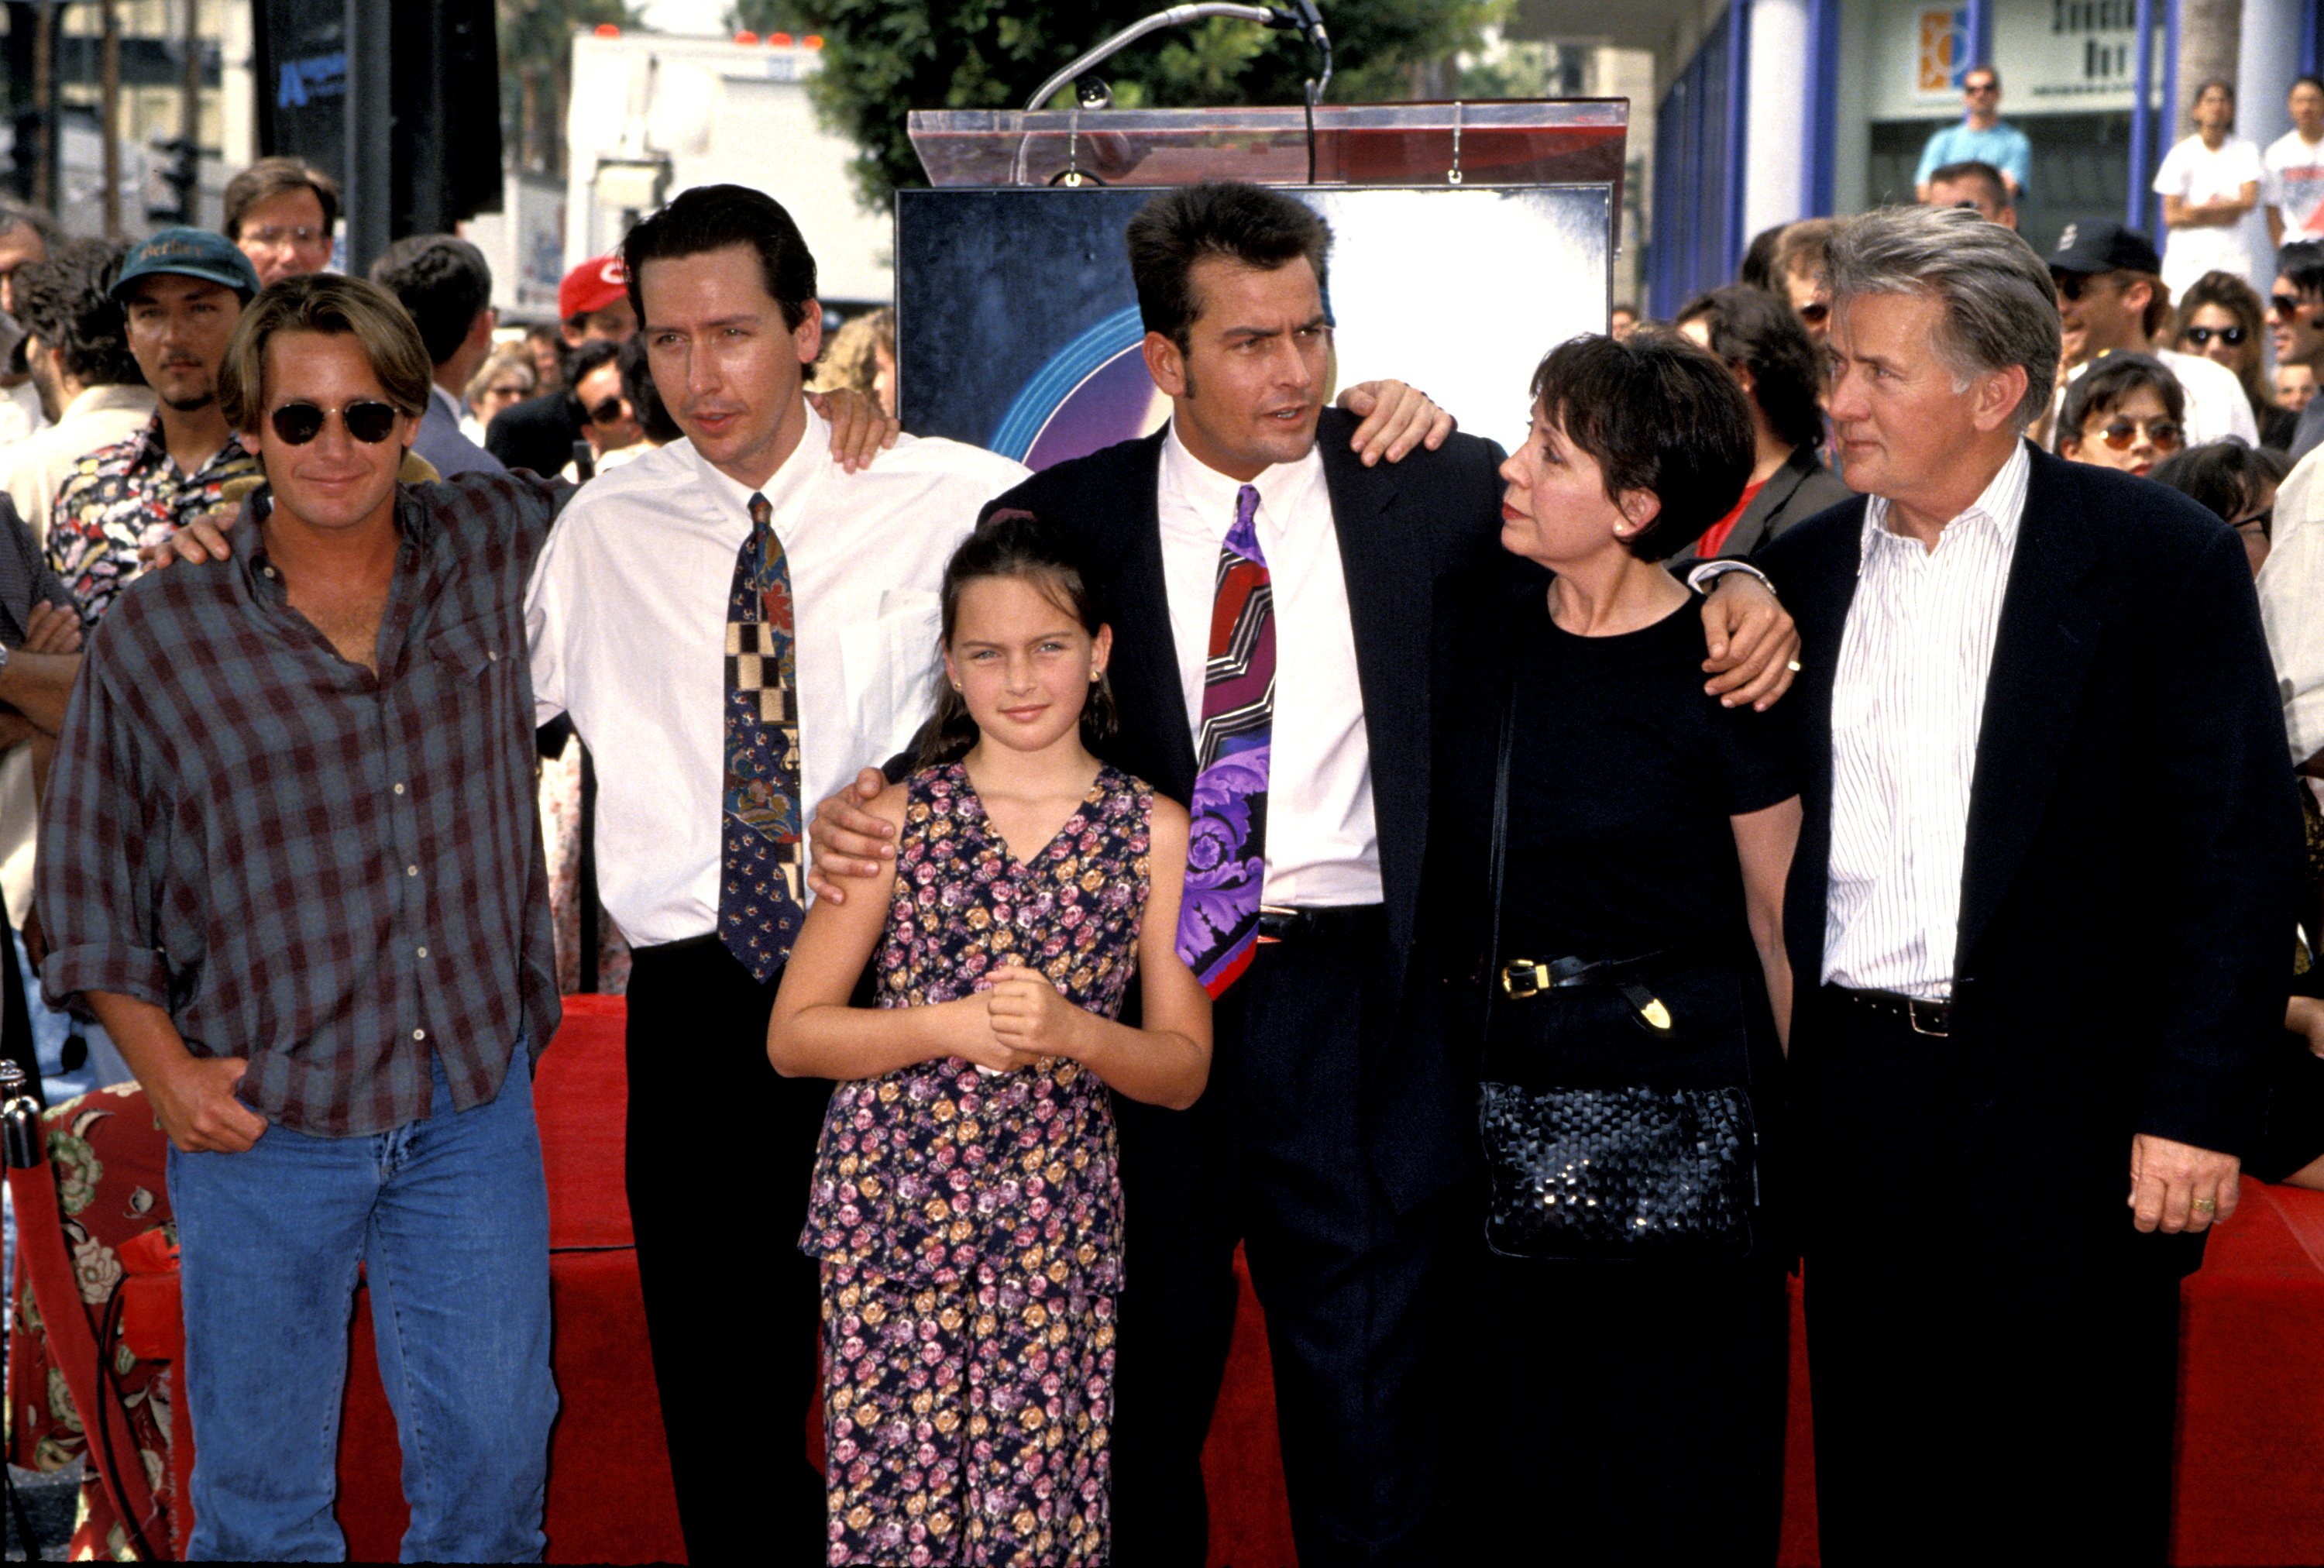 Emilio Estevez, Ramon Estevez, Charlie Sheen pictured with their parents Janet Sheen and Martin Sheen. / Source: Getty Images